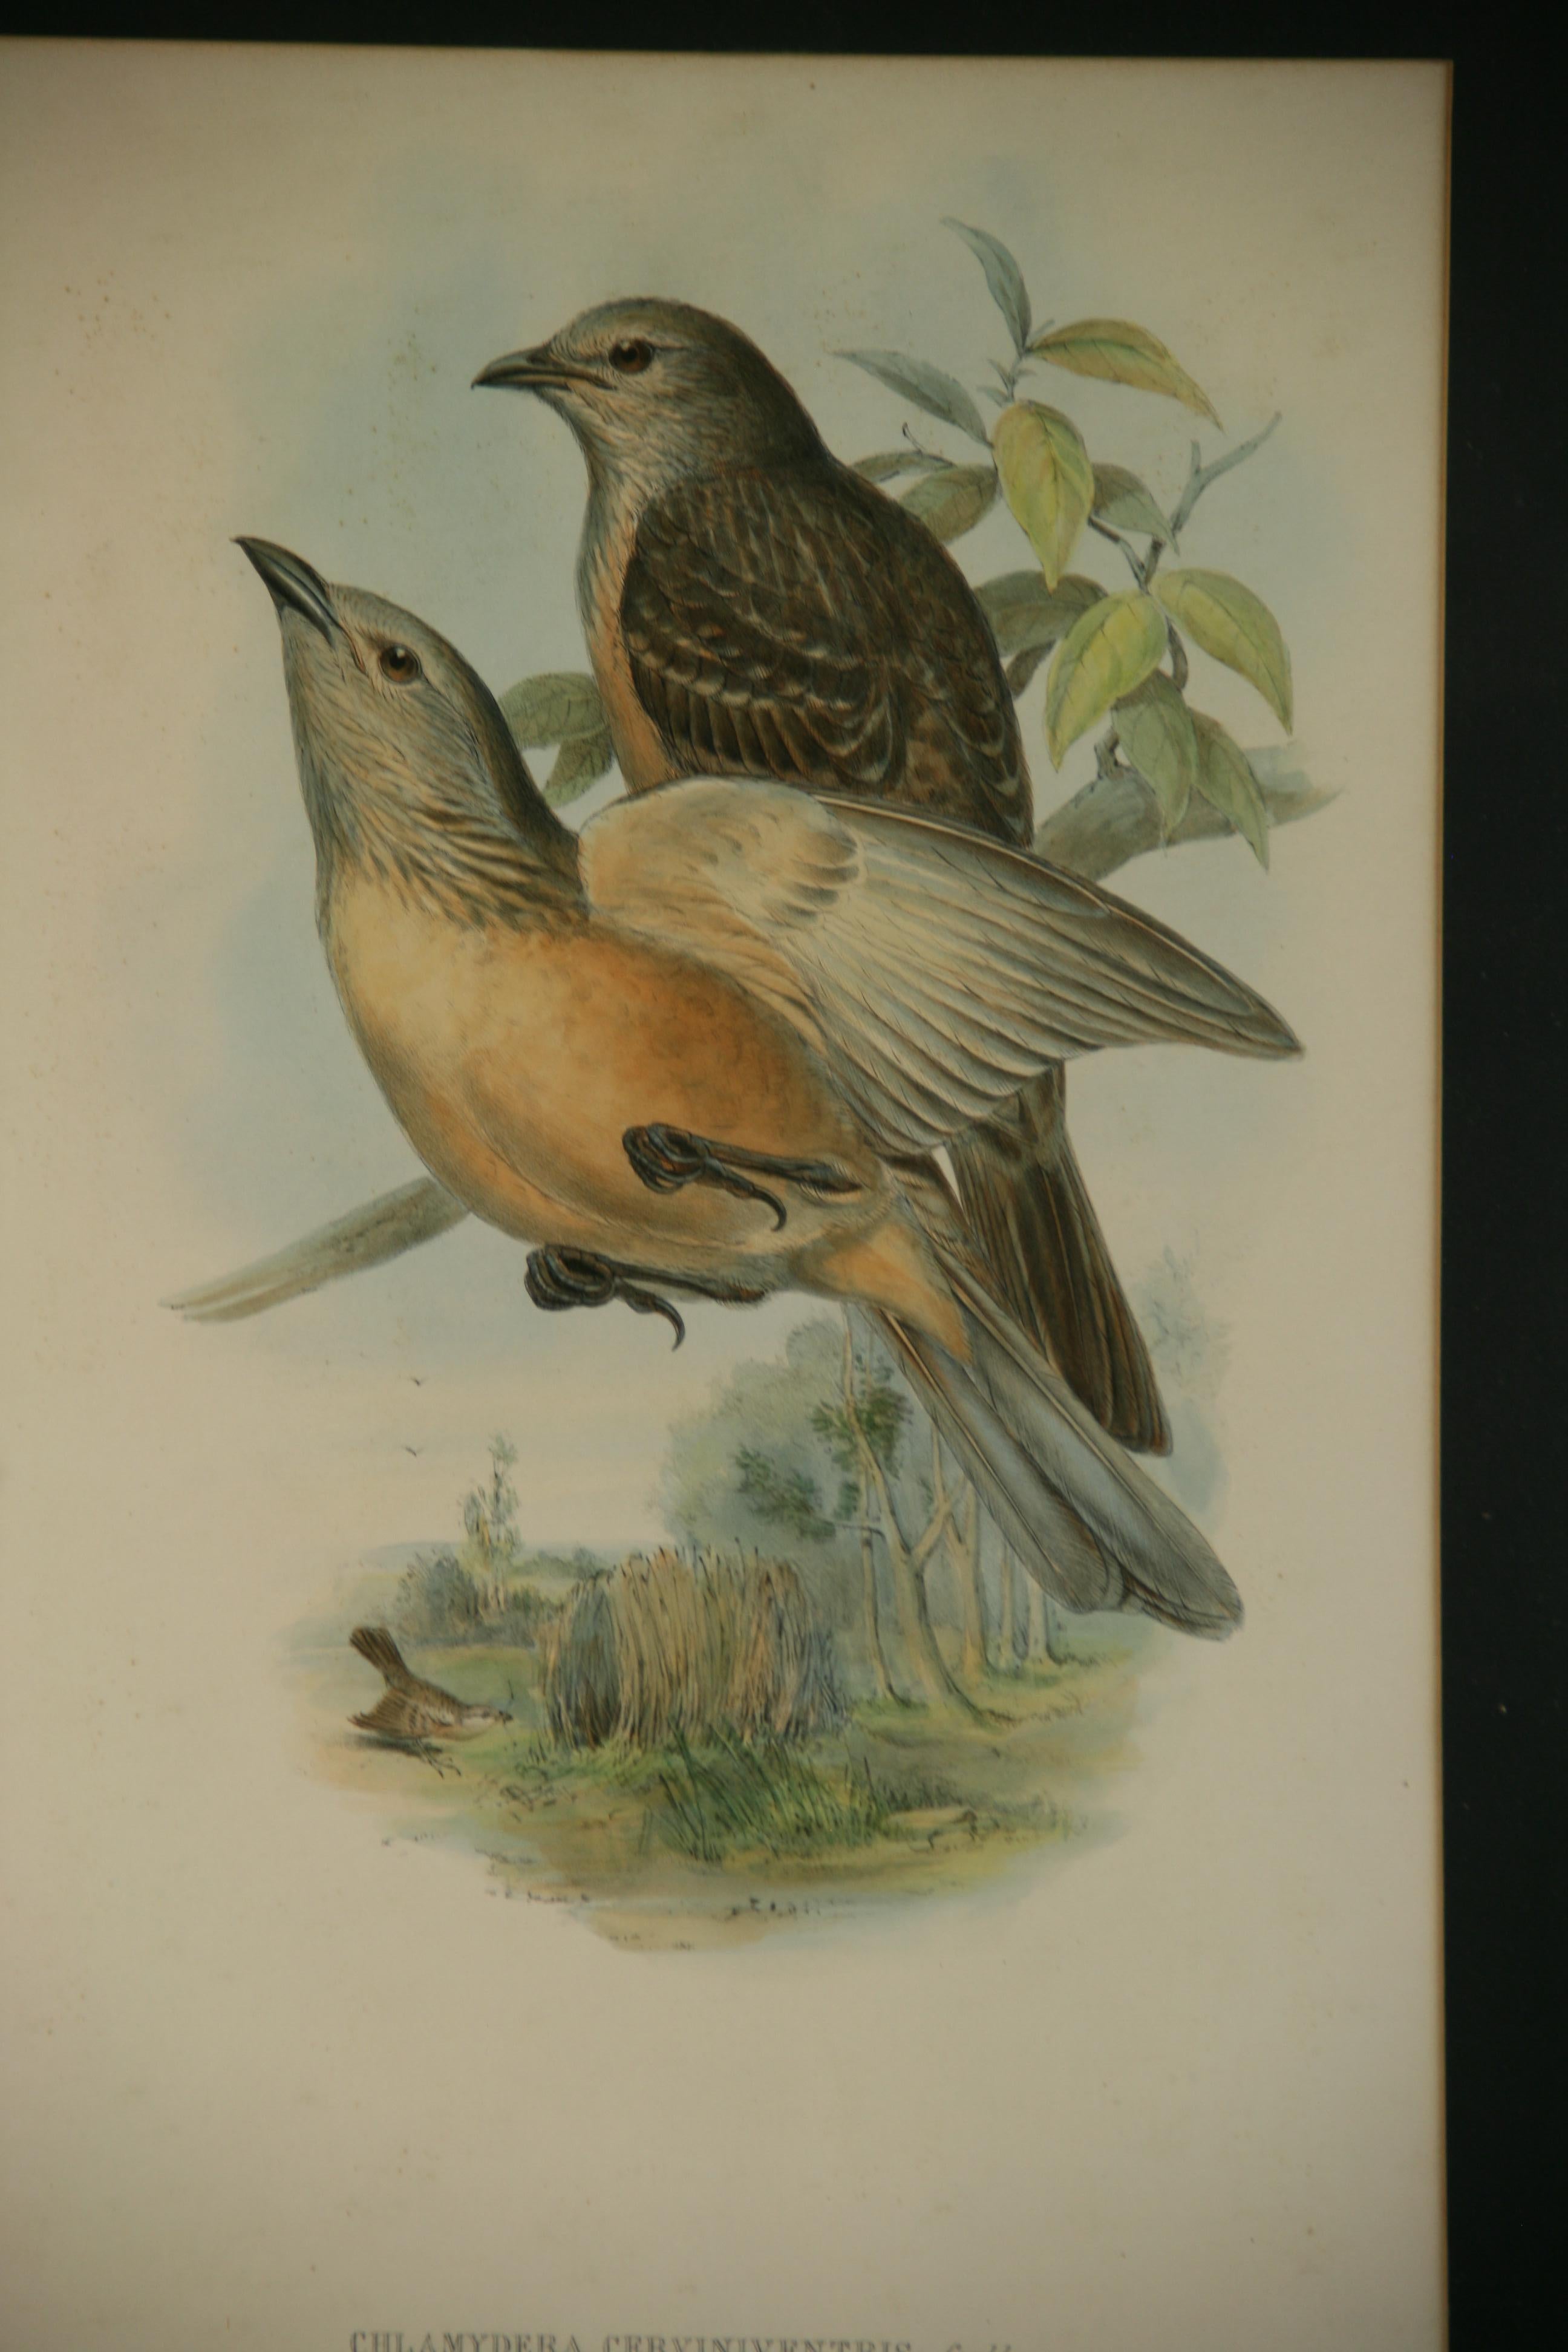 3773 hand colored bird engraving by Hullmandel and Watson.
Set in a custom matt
Image size: 11.5 x 17.5